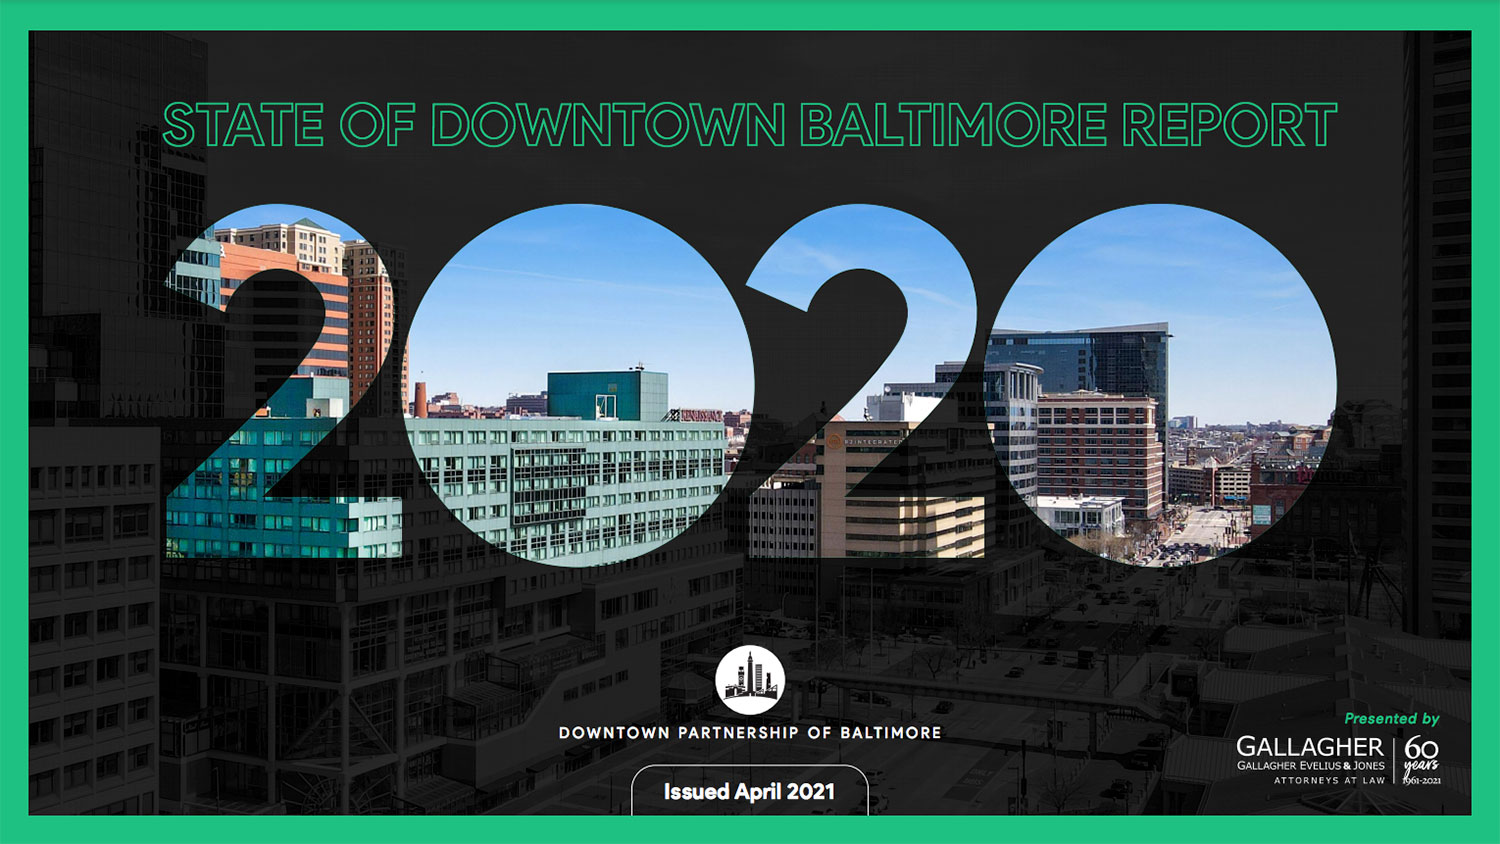 2020 State of Downtown Baltimore report cover featuring drone shot of Downtown Baltimore skyline.